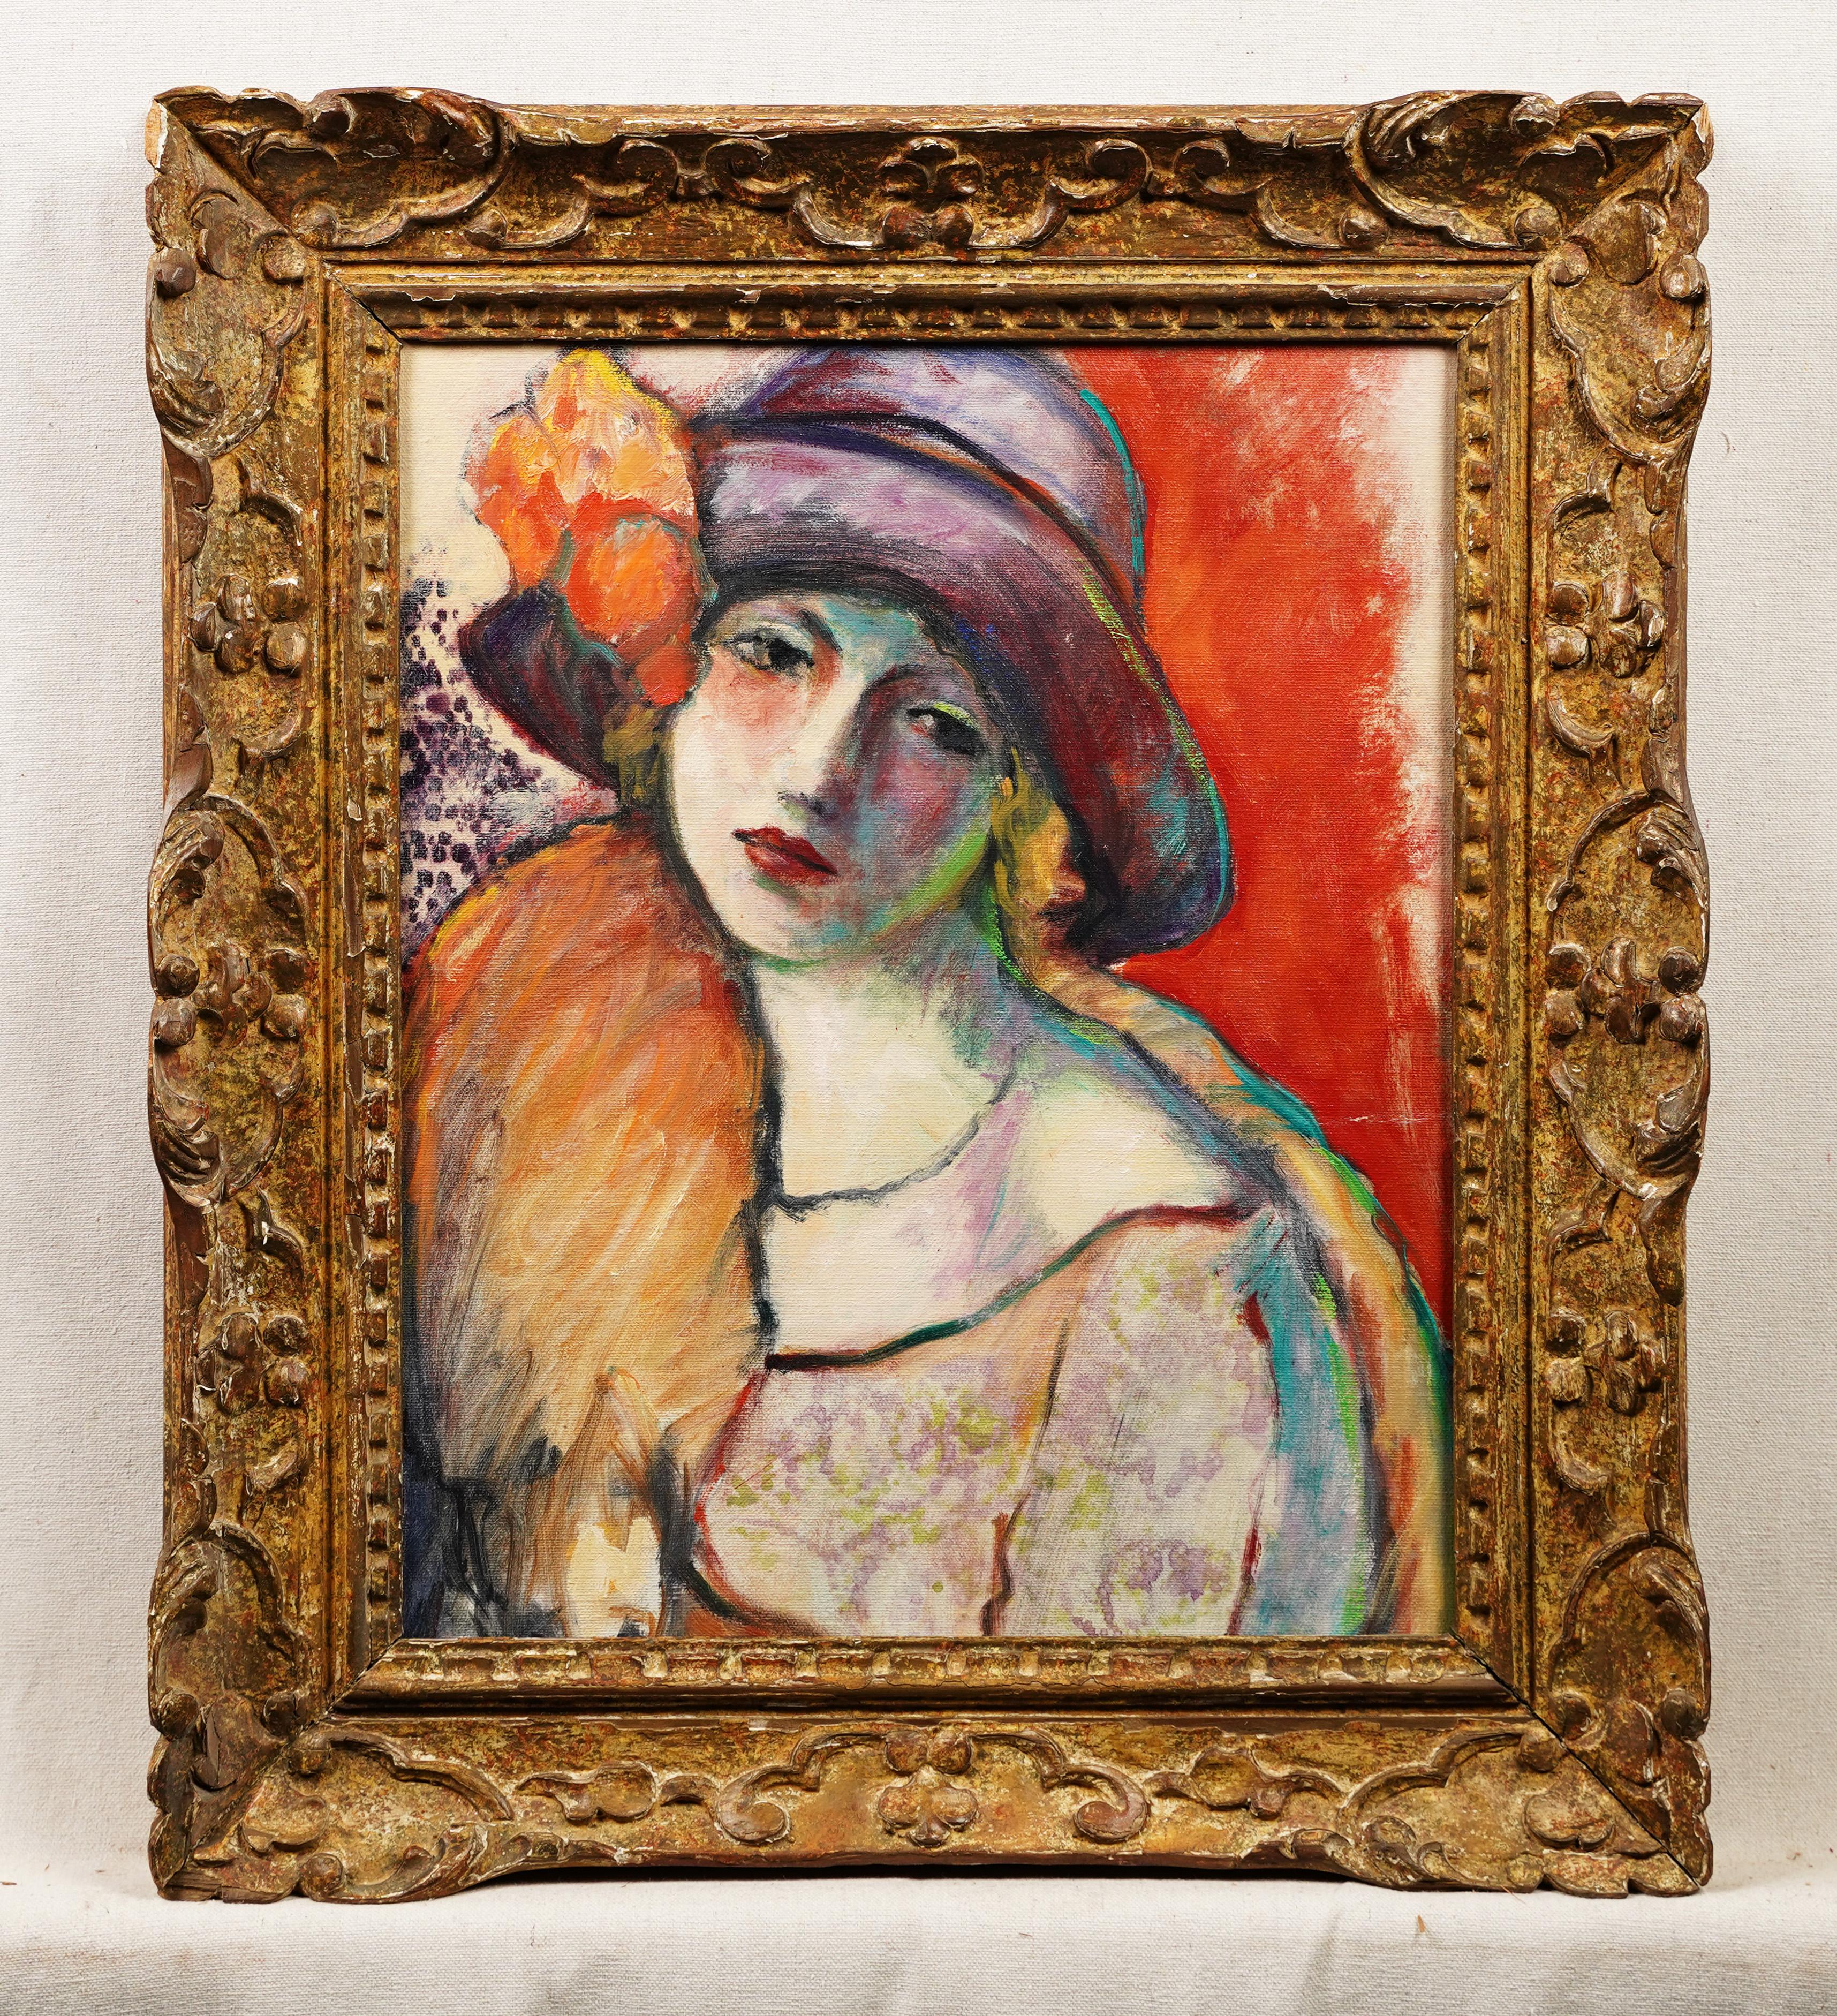 Antique American modernist portrait oil painting.  Oil on canvas, lain to board.  Framed. Very finely painted and a rare fauvist palette.  No signature found.  